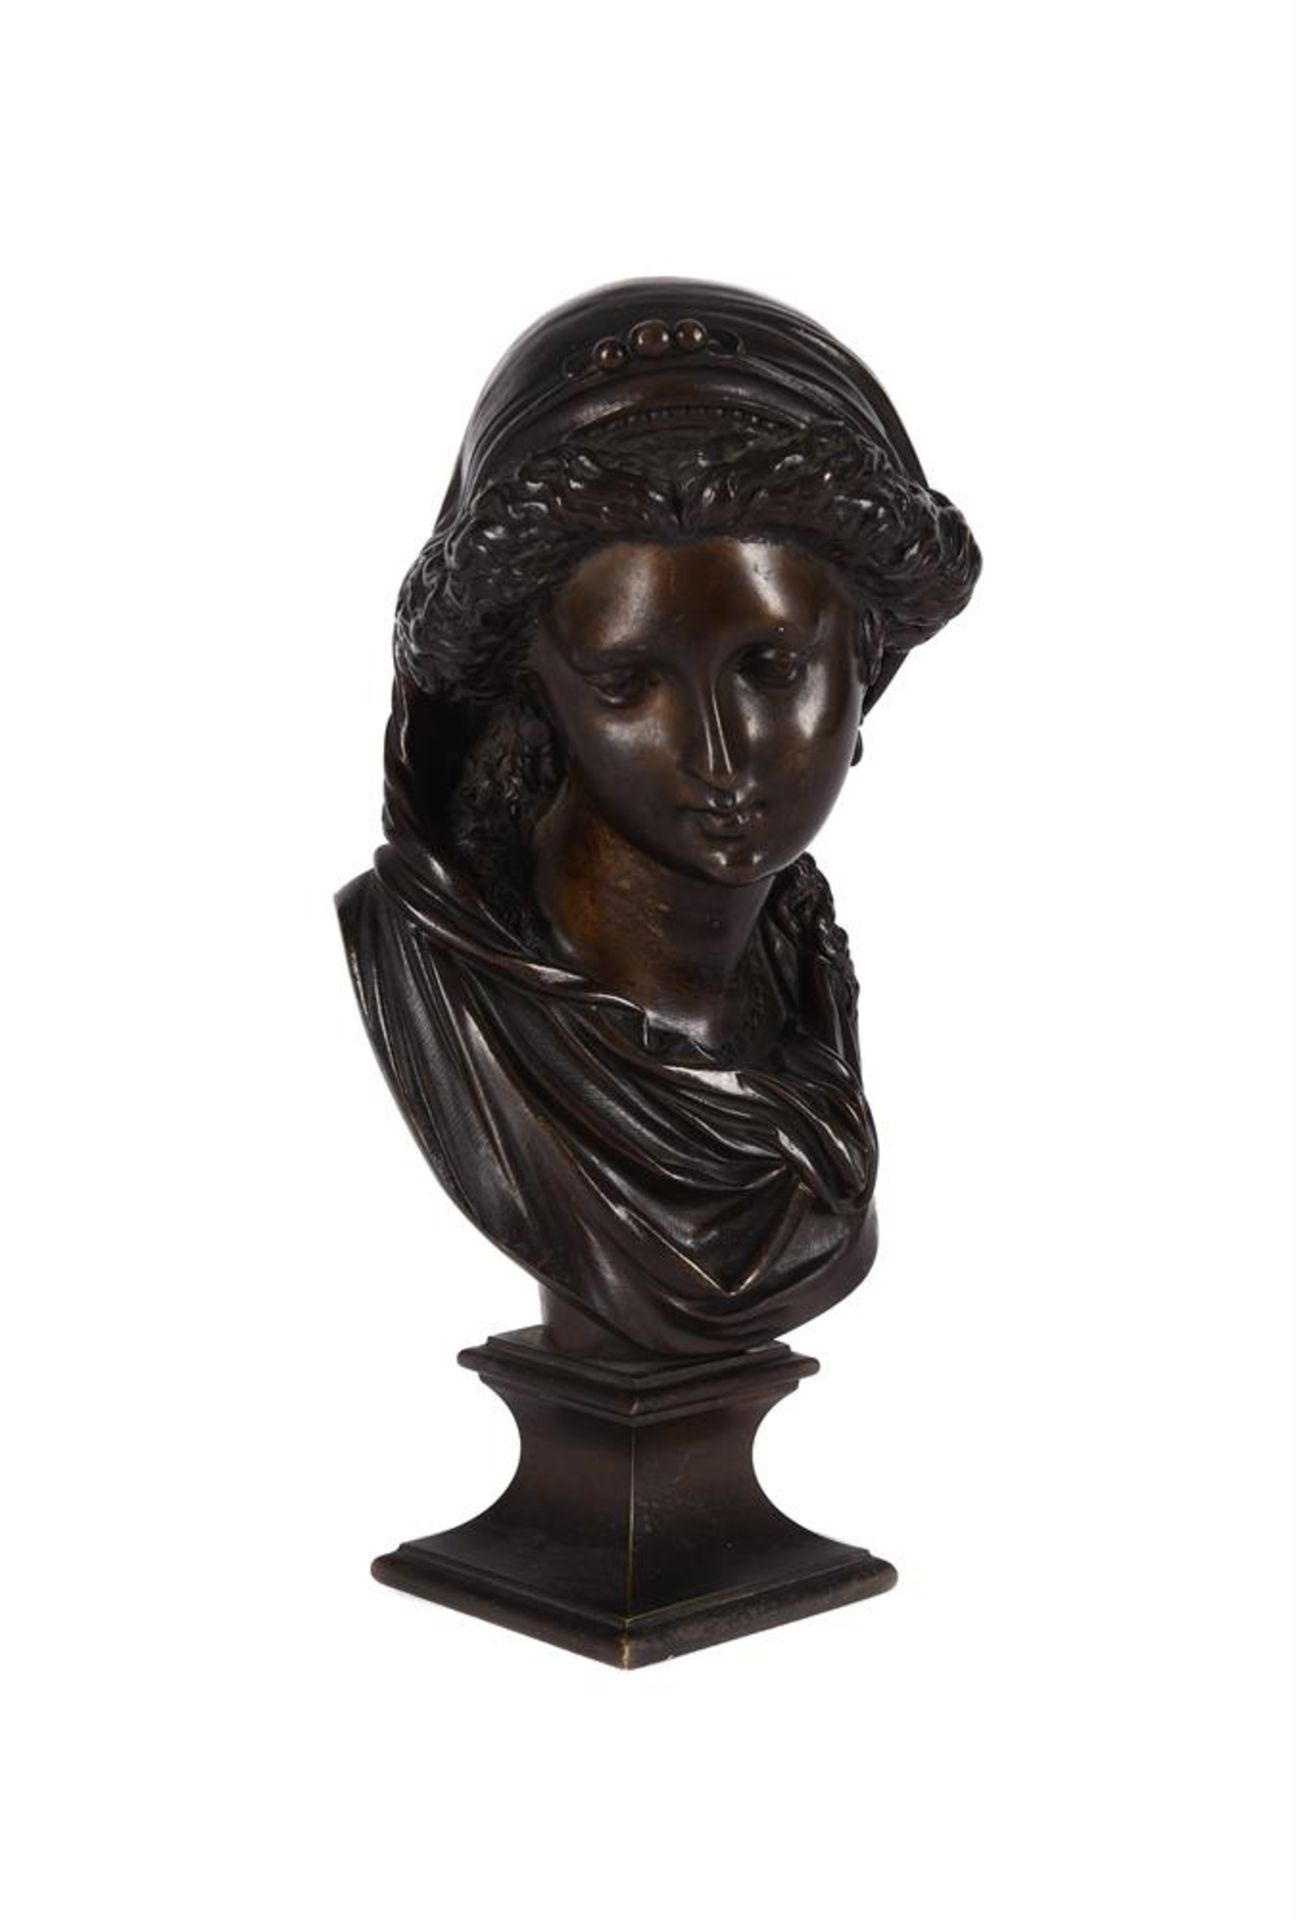 AFTER ALBERT CARRIER BELLEUSE (FRENCH 1824-1887), BRONZE BUST OF A WOMAN